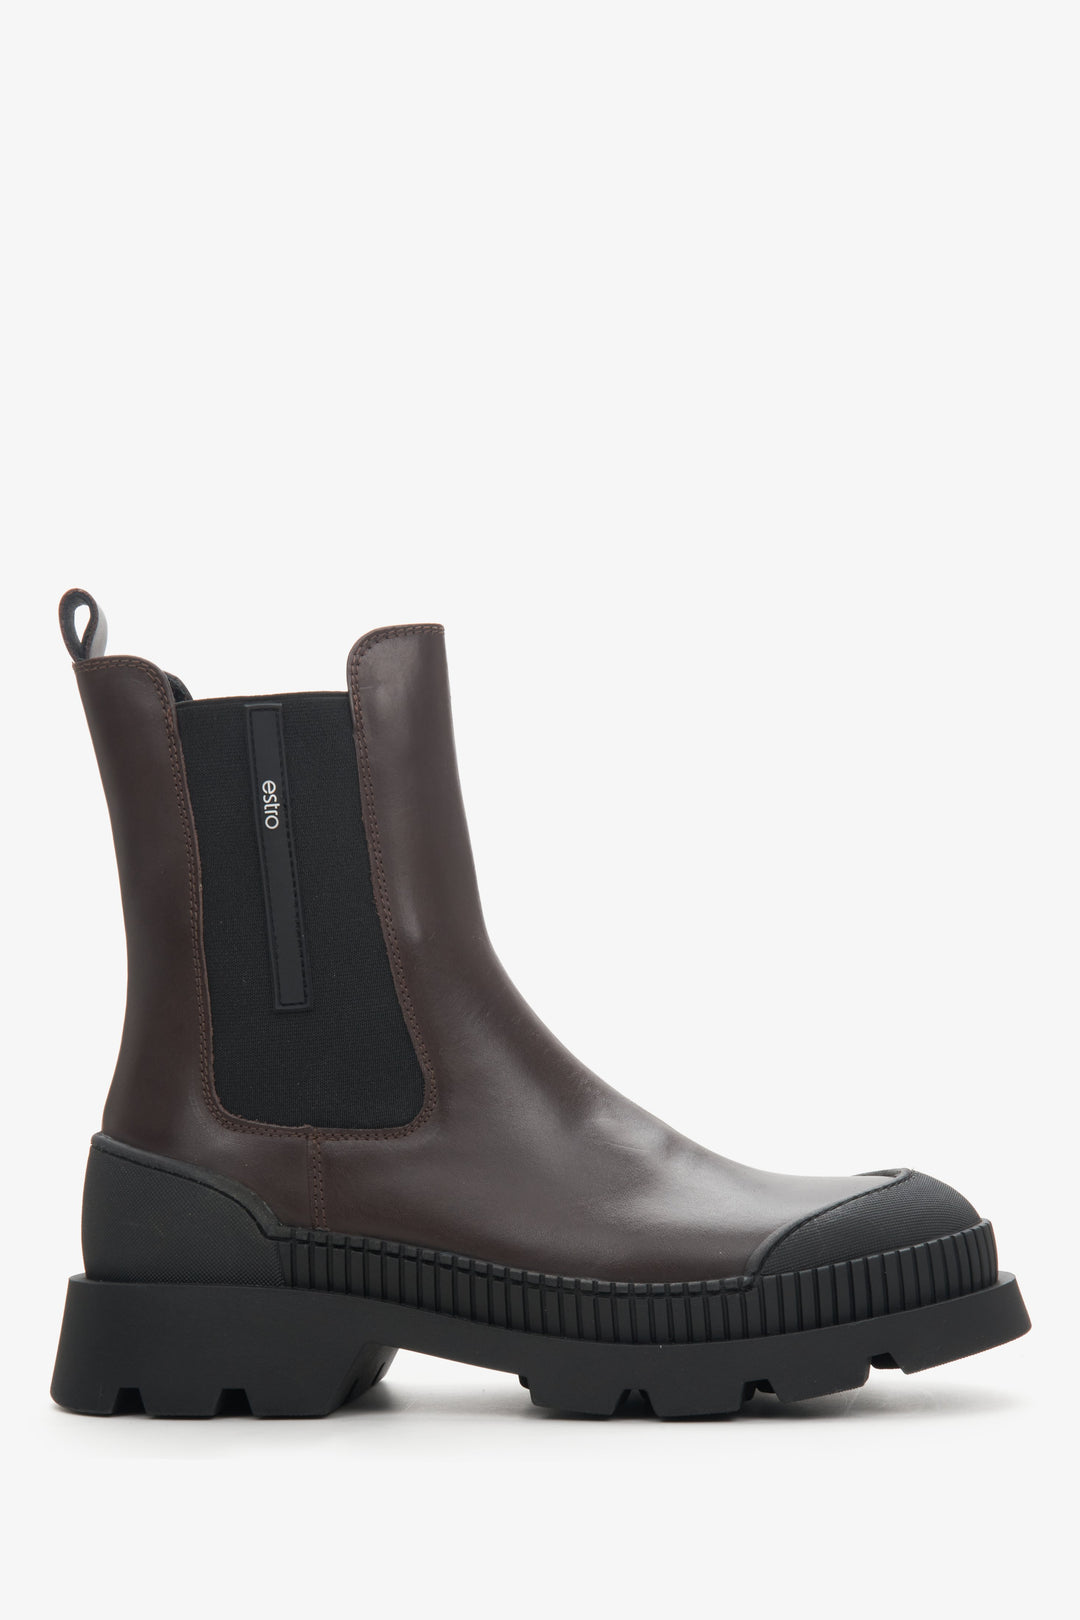 Women's Brown & Black Chelsea Boots made of Genuine Leather Estro ER00113304.